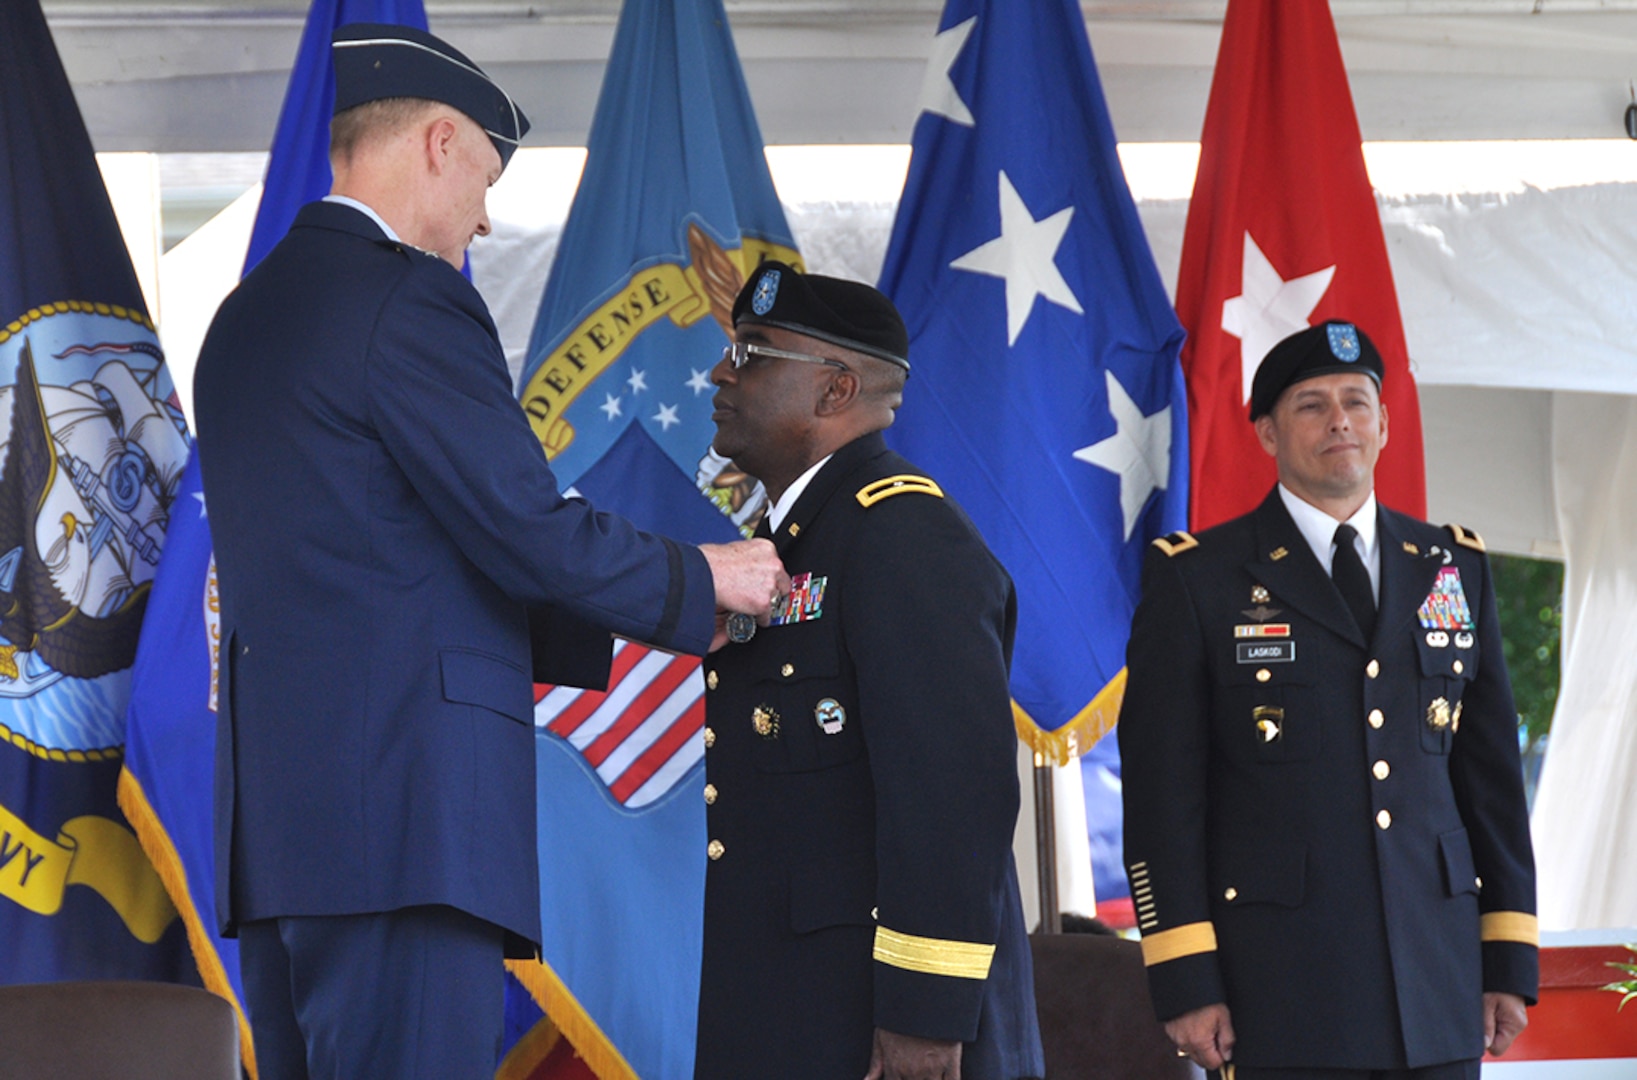 Air Force Lt. Gen. Andy Busch pins the Defense Superior Service Medal on Army Brig. Gen. Richard Dix as Brig. Gen. John Laskodi looks on at the DLA Distribution change of command ceremony in New Cumberland, Pennsylvania, June 17. Dix concluded 24 months as commander of DLA Distribution.